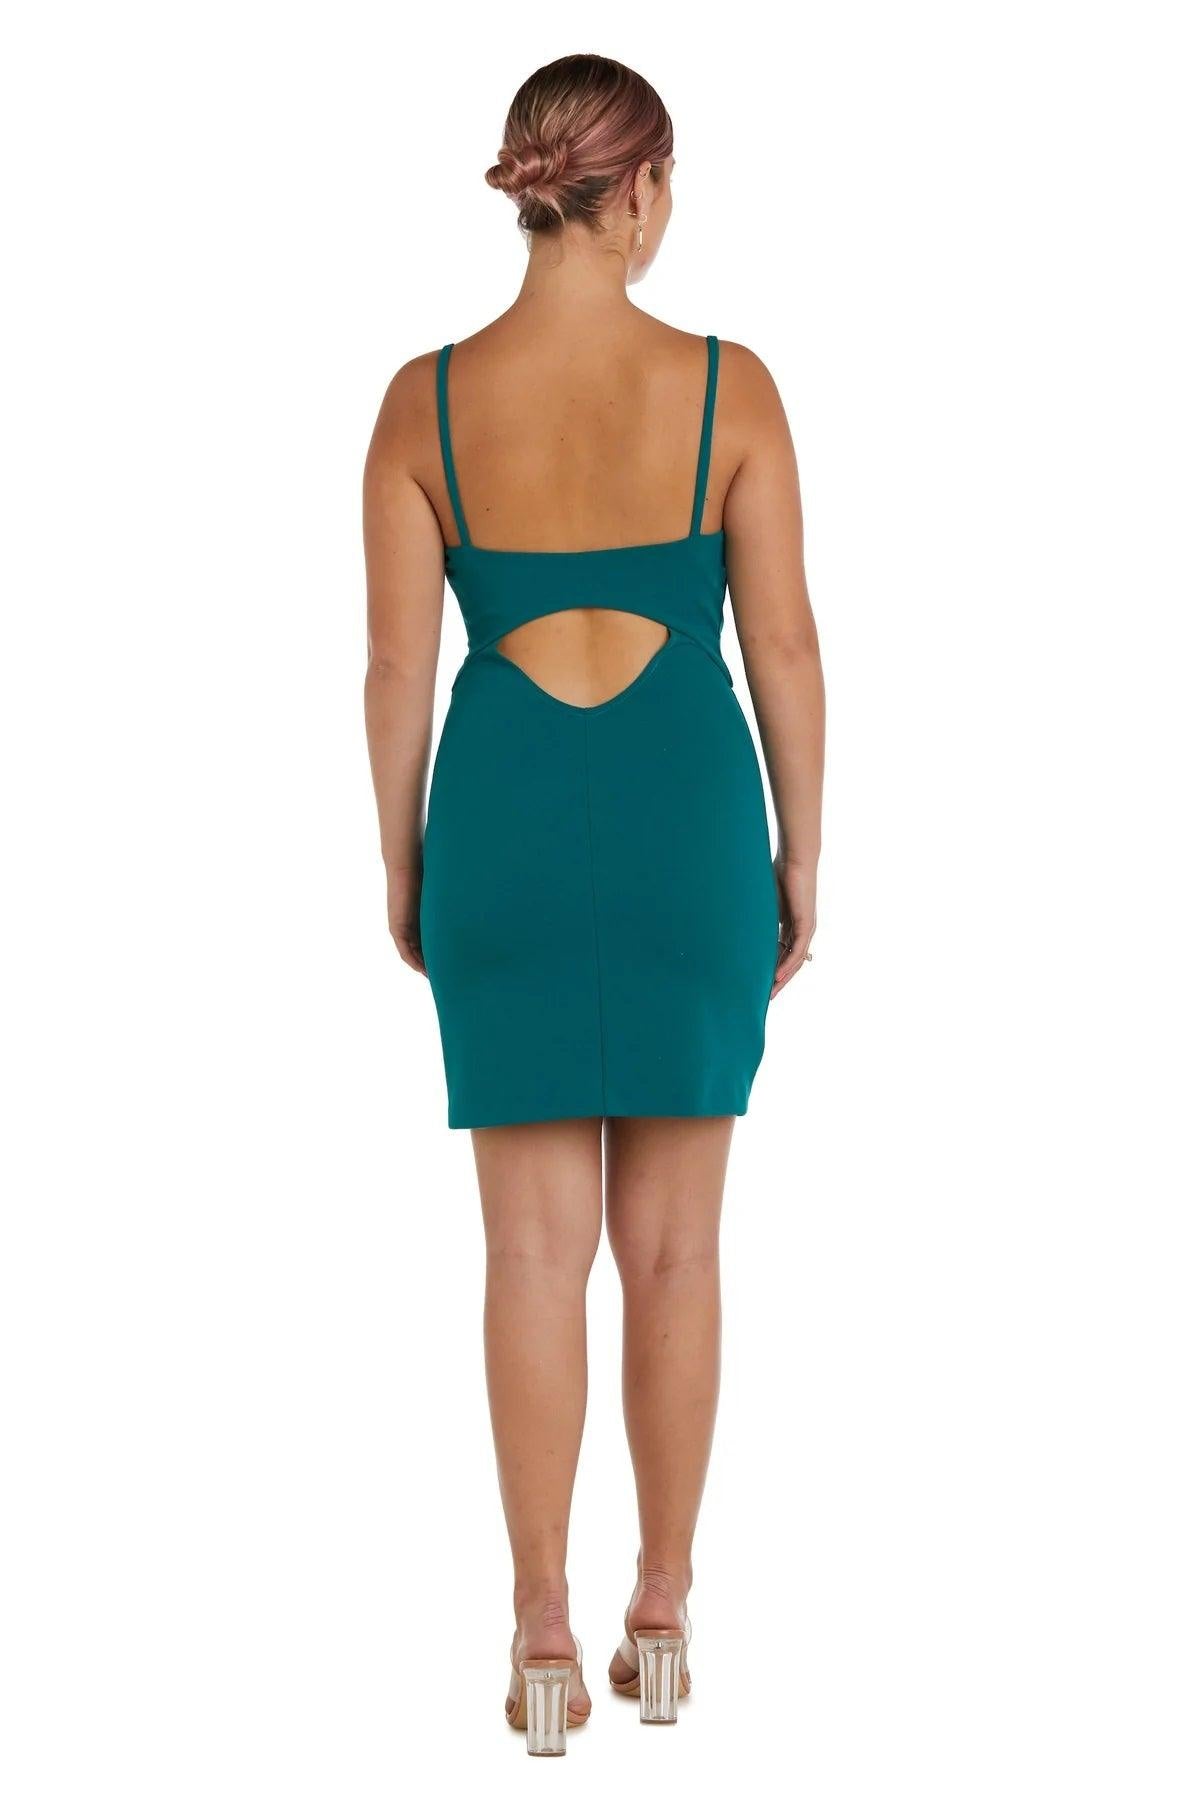 Morgan & Co Short Homecoming Cocktail Dress 13045 - The Dress Outlet